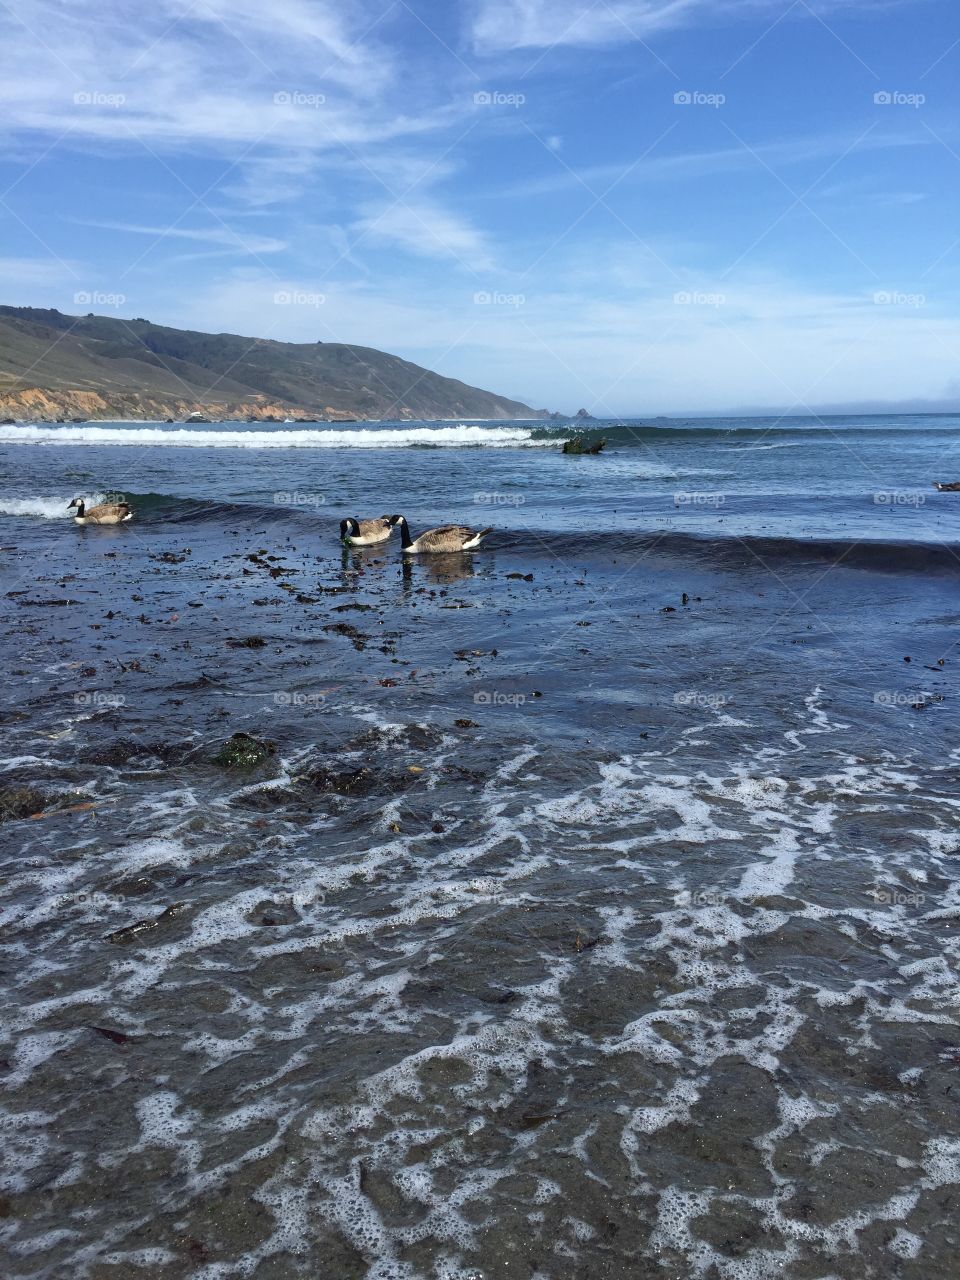 Geese at the Beach 4. Taken in Big Sur